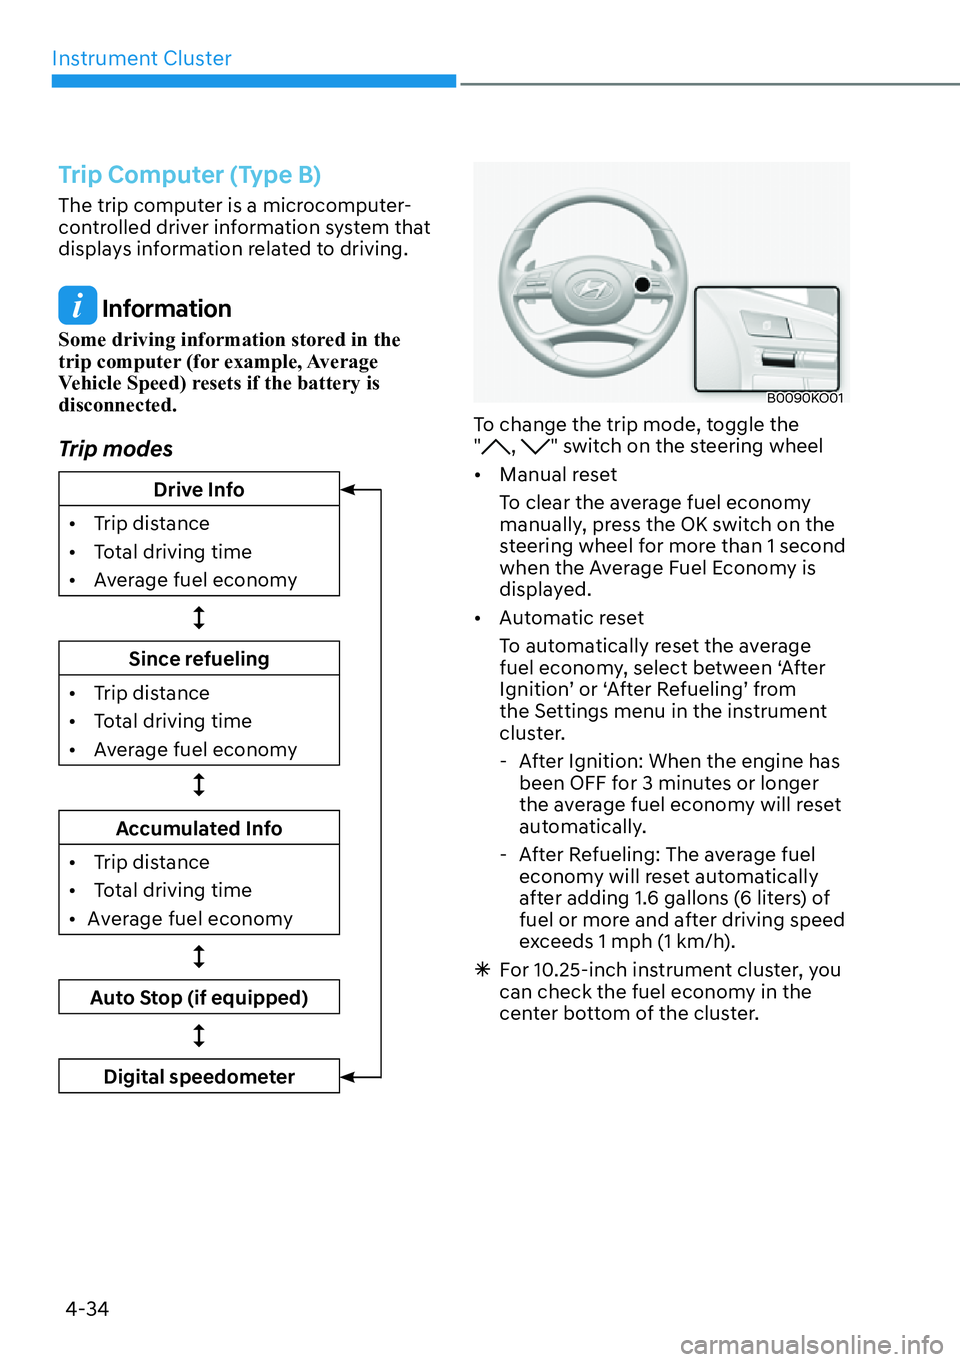 HYUNDAI PALISADE 2023  Owners Manual Instrument Cluster4-34
Trip Computer (Type B)
The trip computer is a microcomputer-
controlled driver information system that 
displays information related to driving.
 Information
Some driving inform